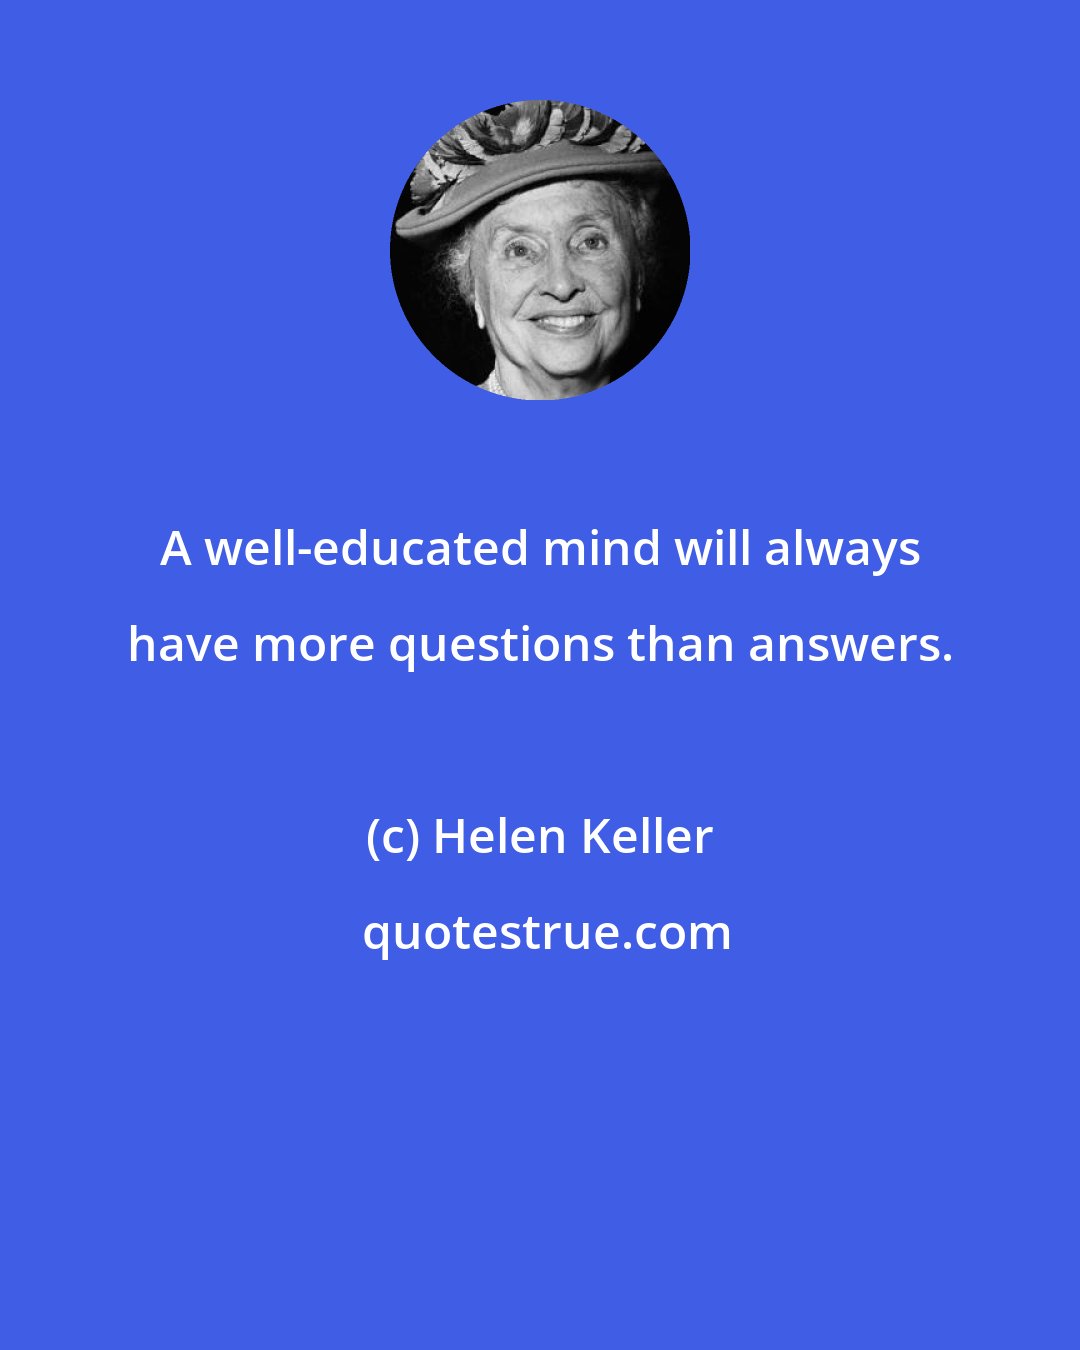 Helen Keller: A well-educated mind will always have more questions than answers.